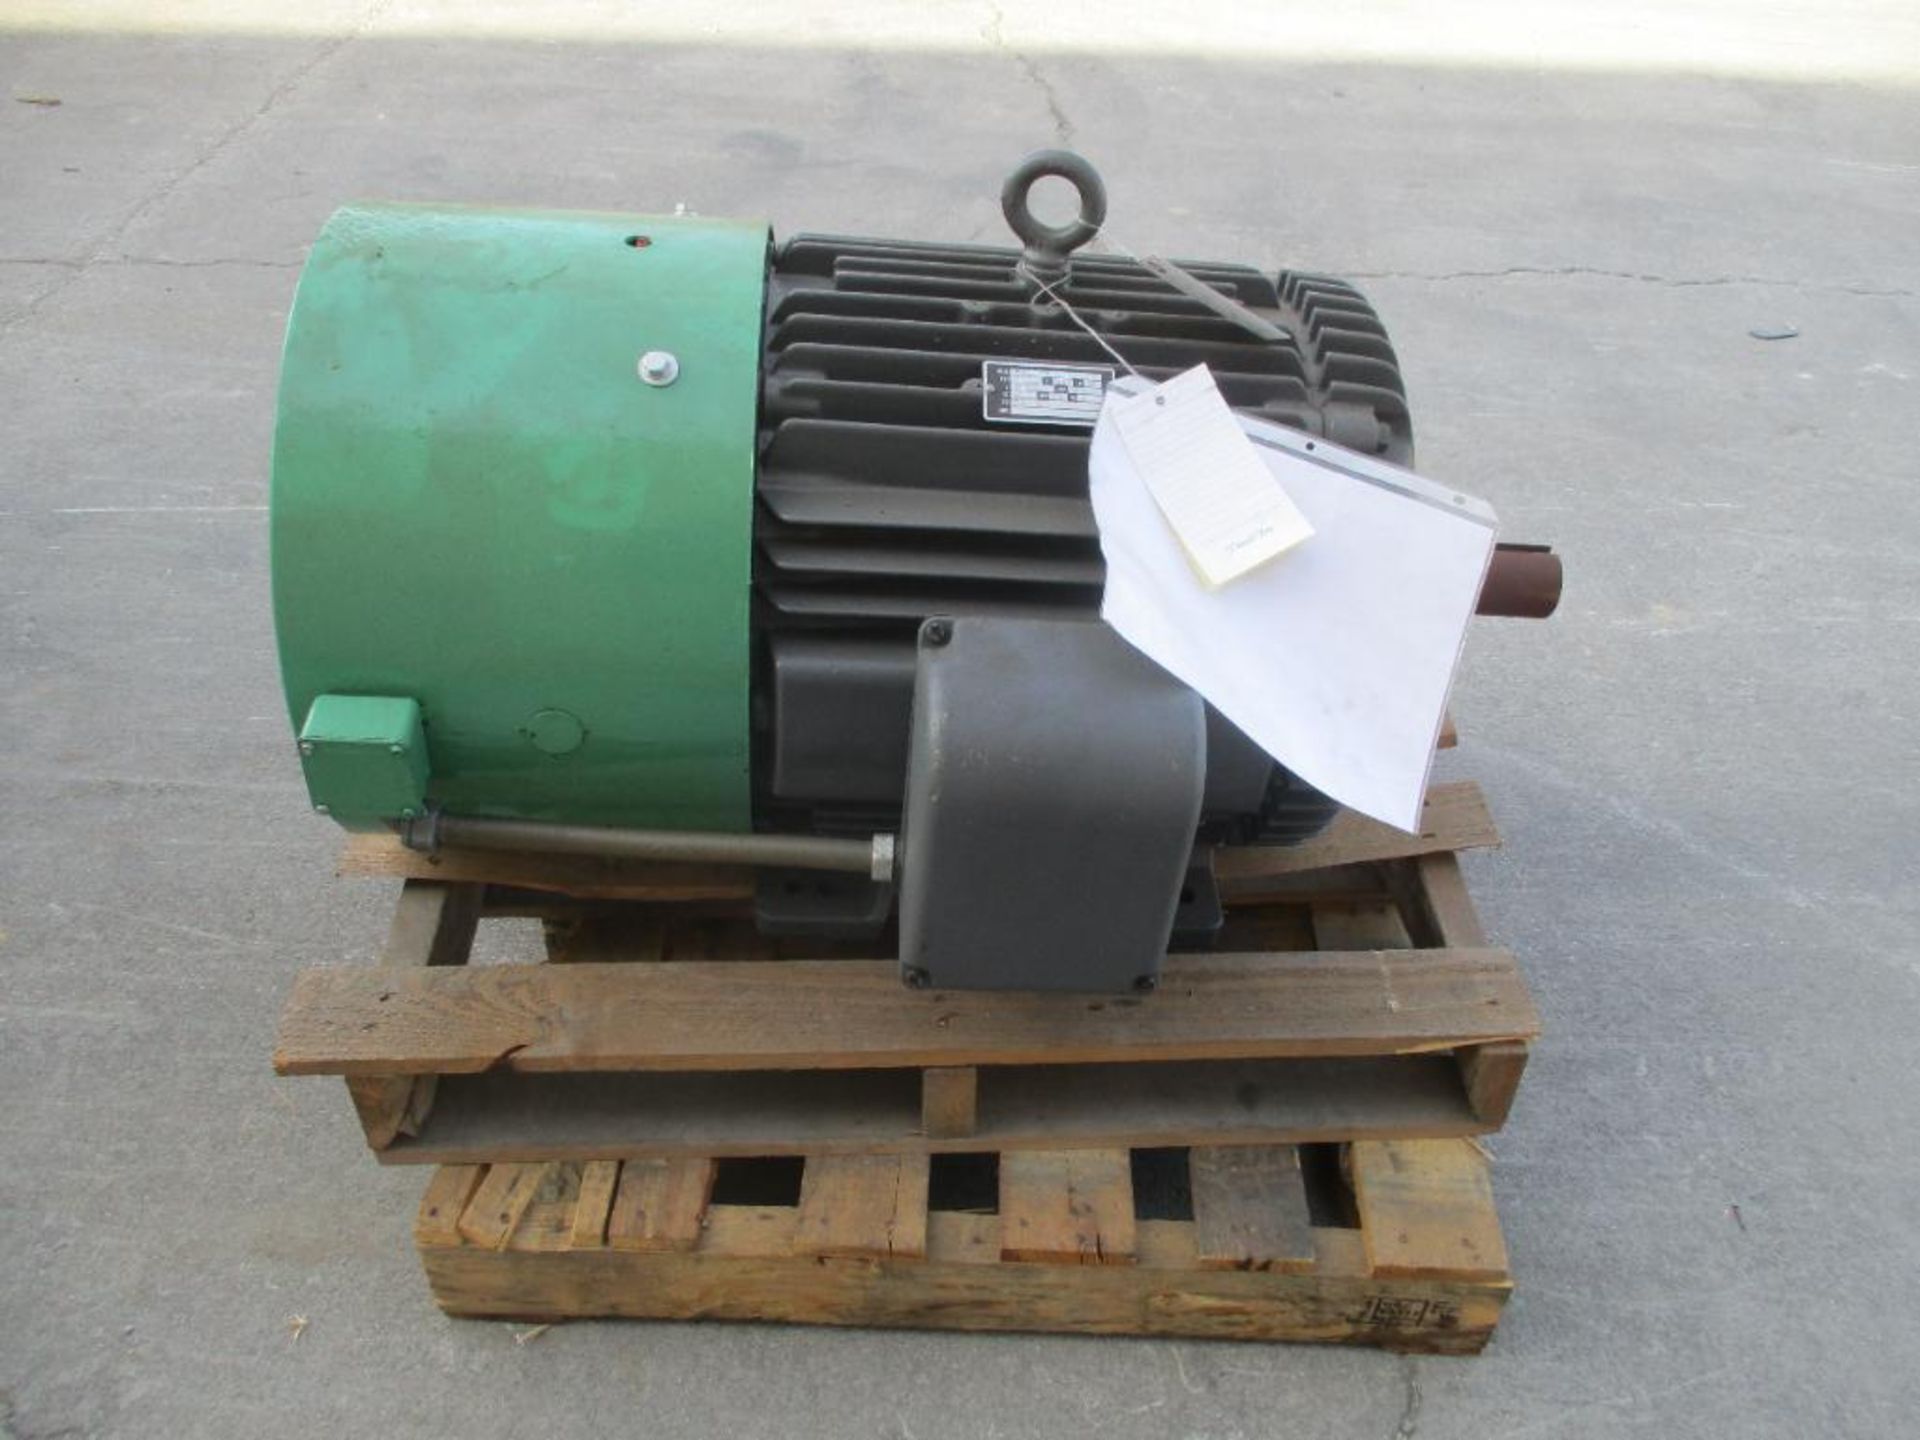 BALDOR 3 PHASE 75HP 1780RPM 365T FRAME A/C MOTOR P/N N/A 874# LBS (THIS LOT IS FOB KNOXVILLE TN) - (